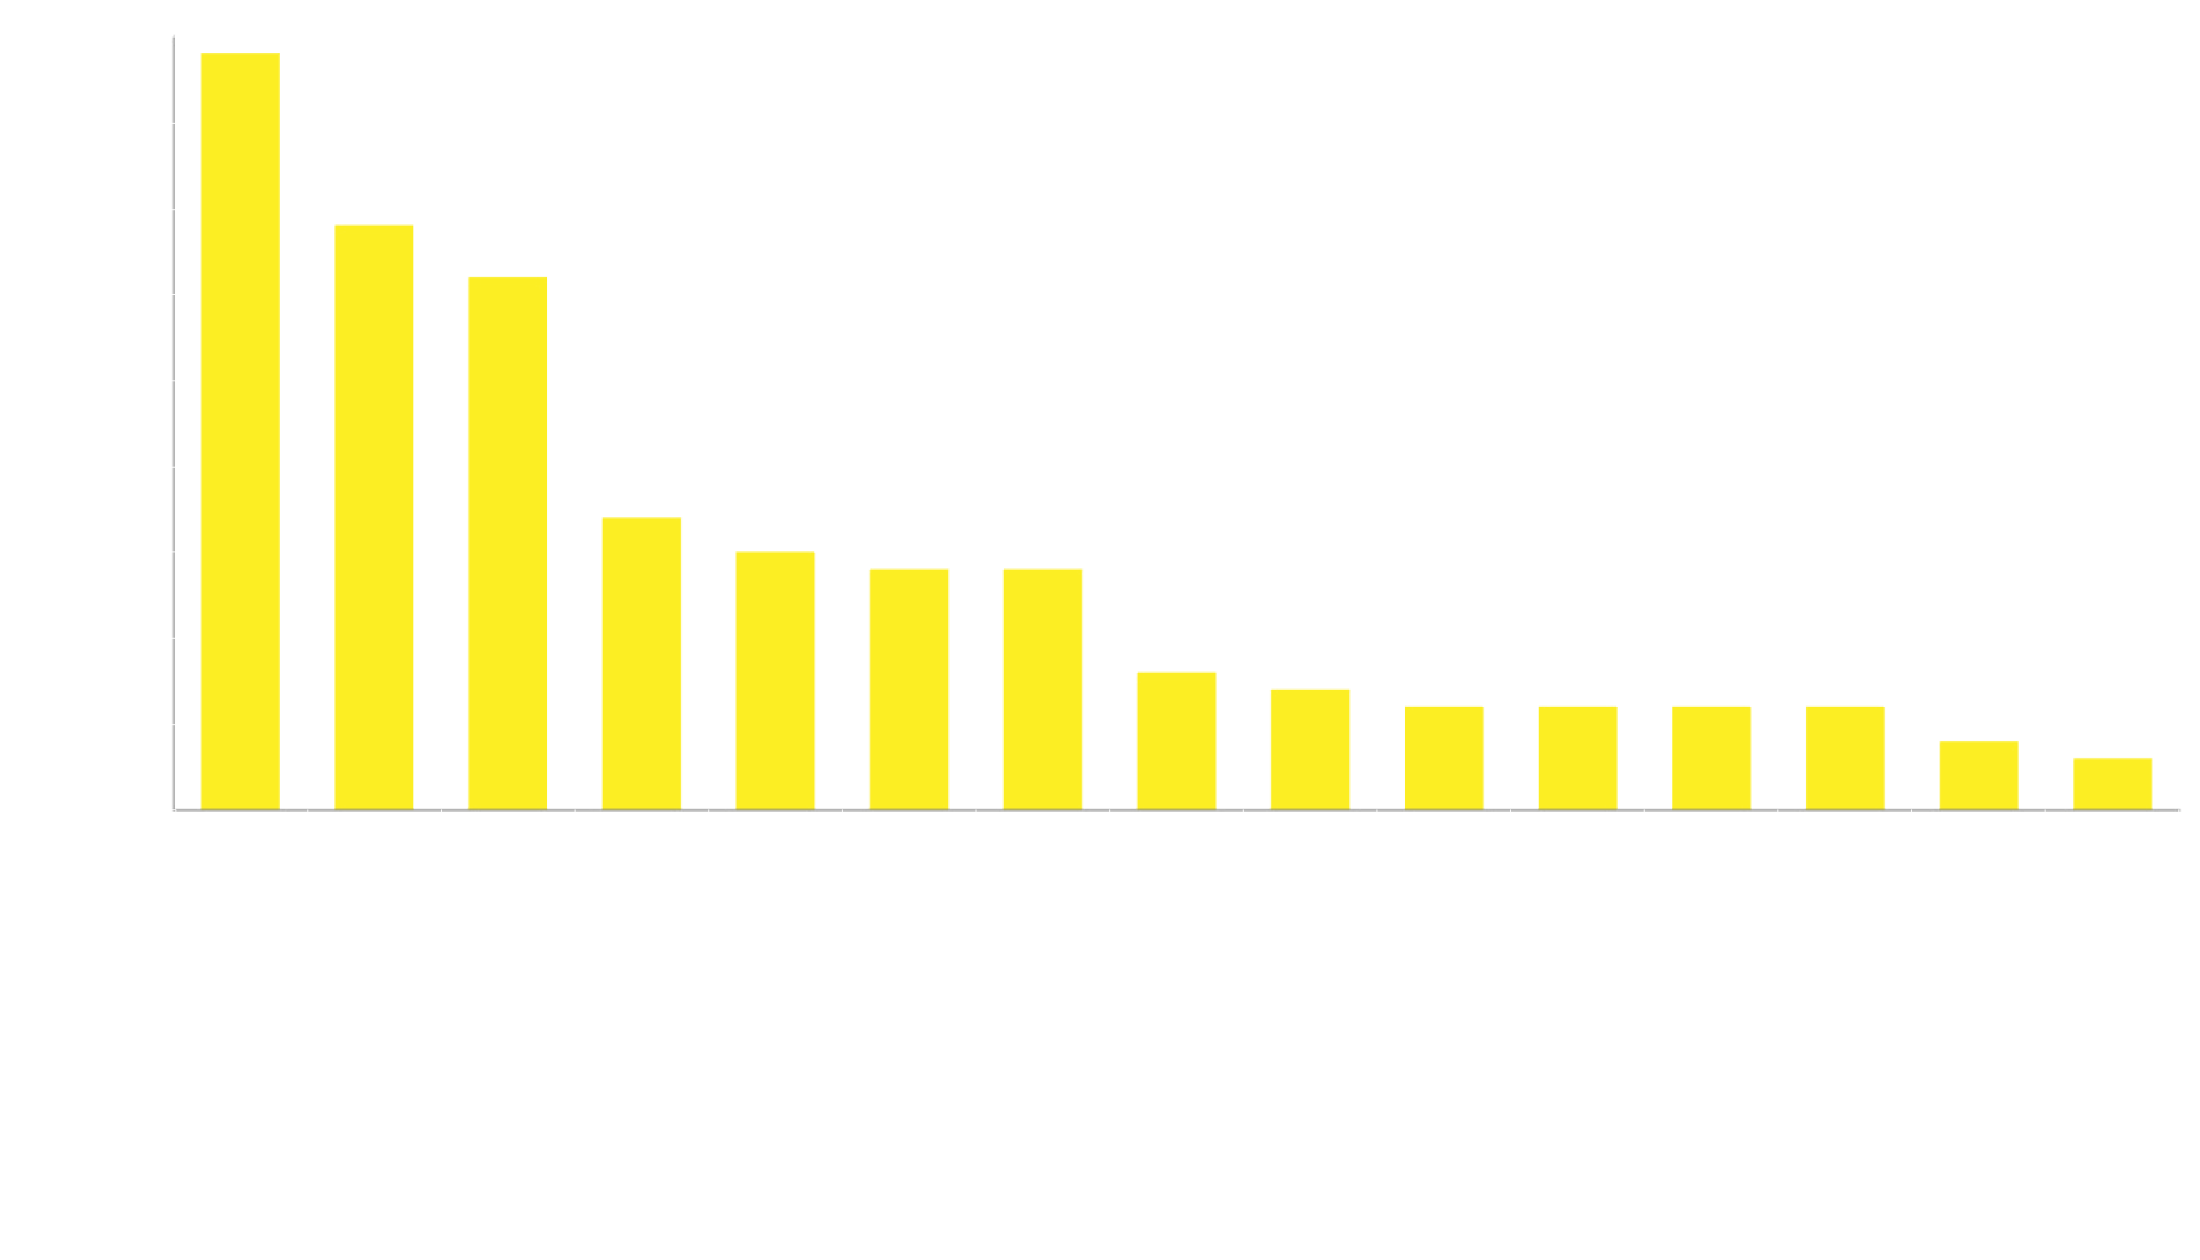 Number of Ontario transactions by industry over the last quarter